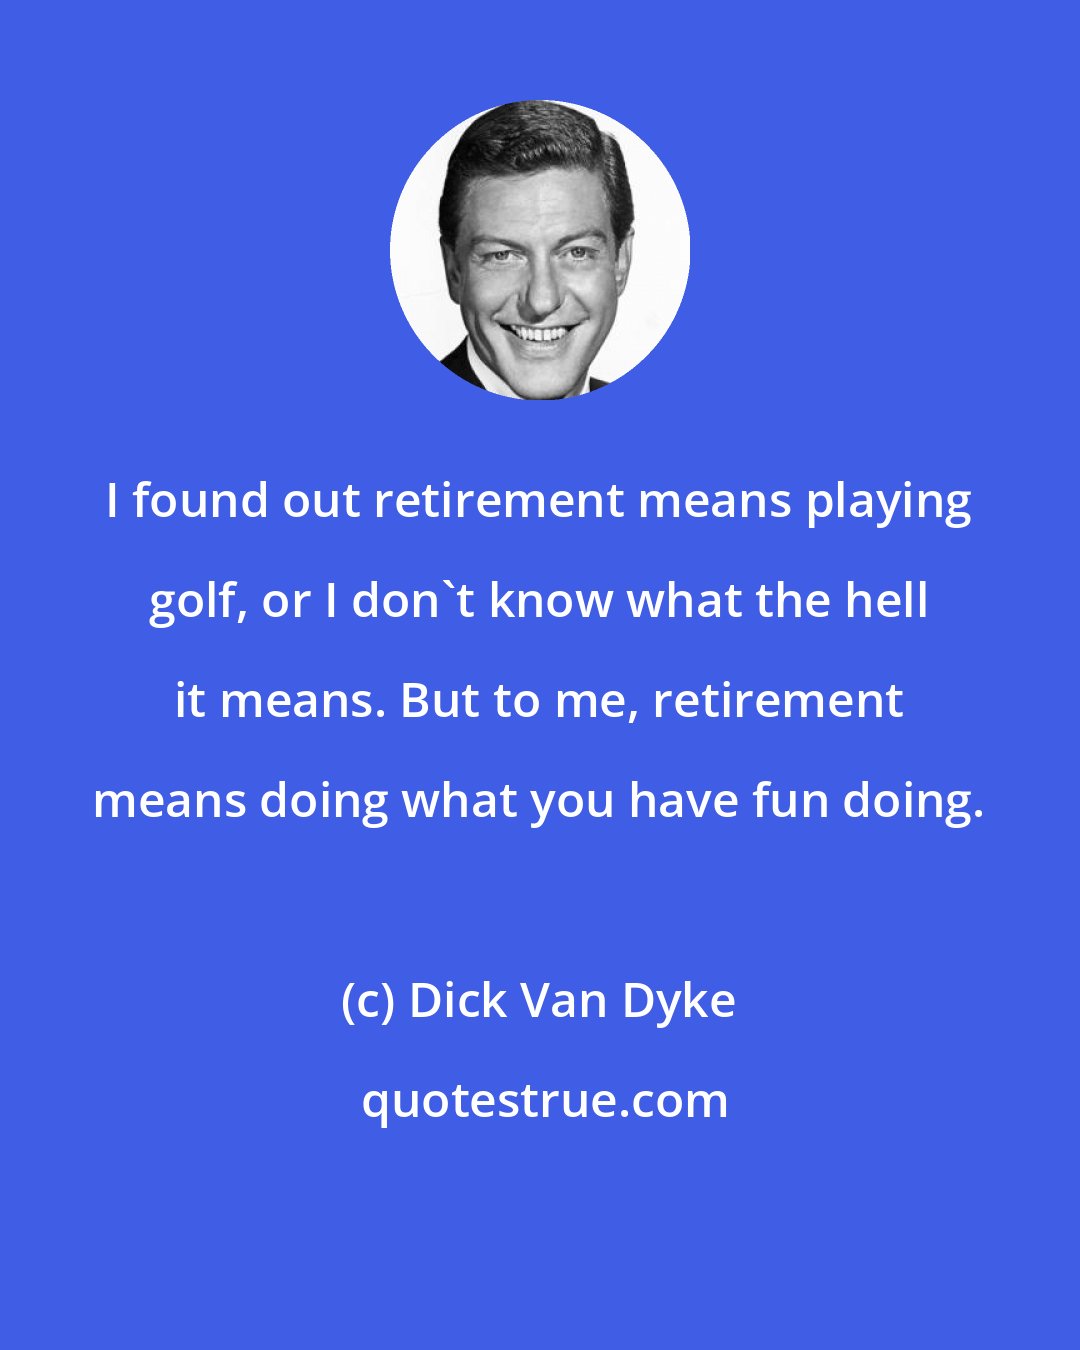 Dick Van Dyke: I found out retirement means playing golf, or I don't know what the hell it means. But to me, retirement means doing what you have fun doing.